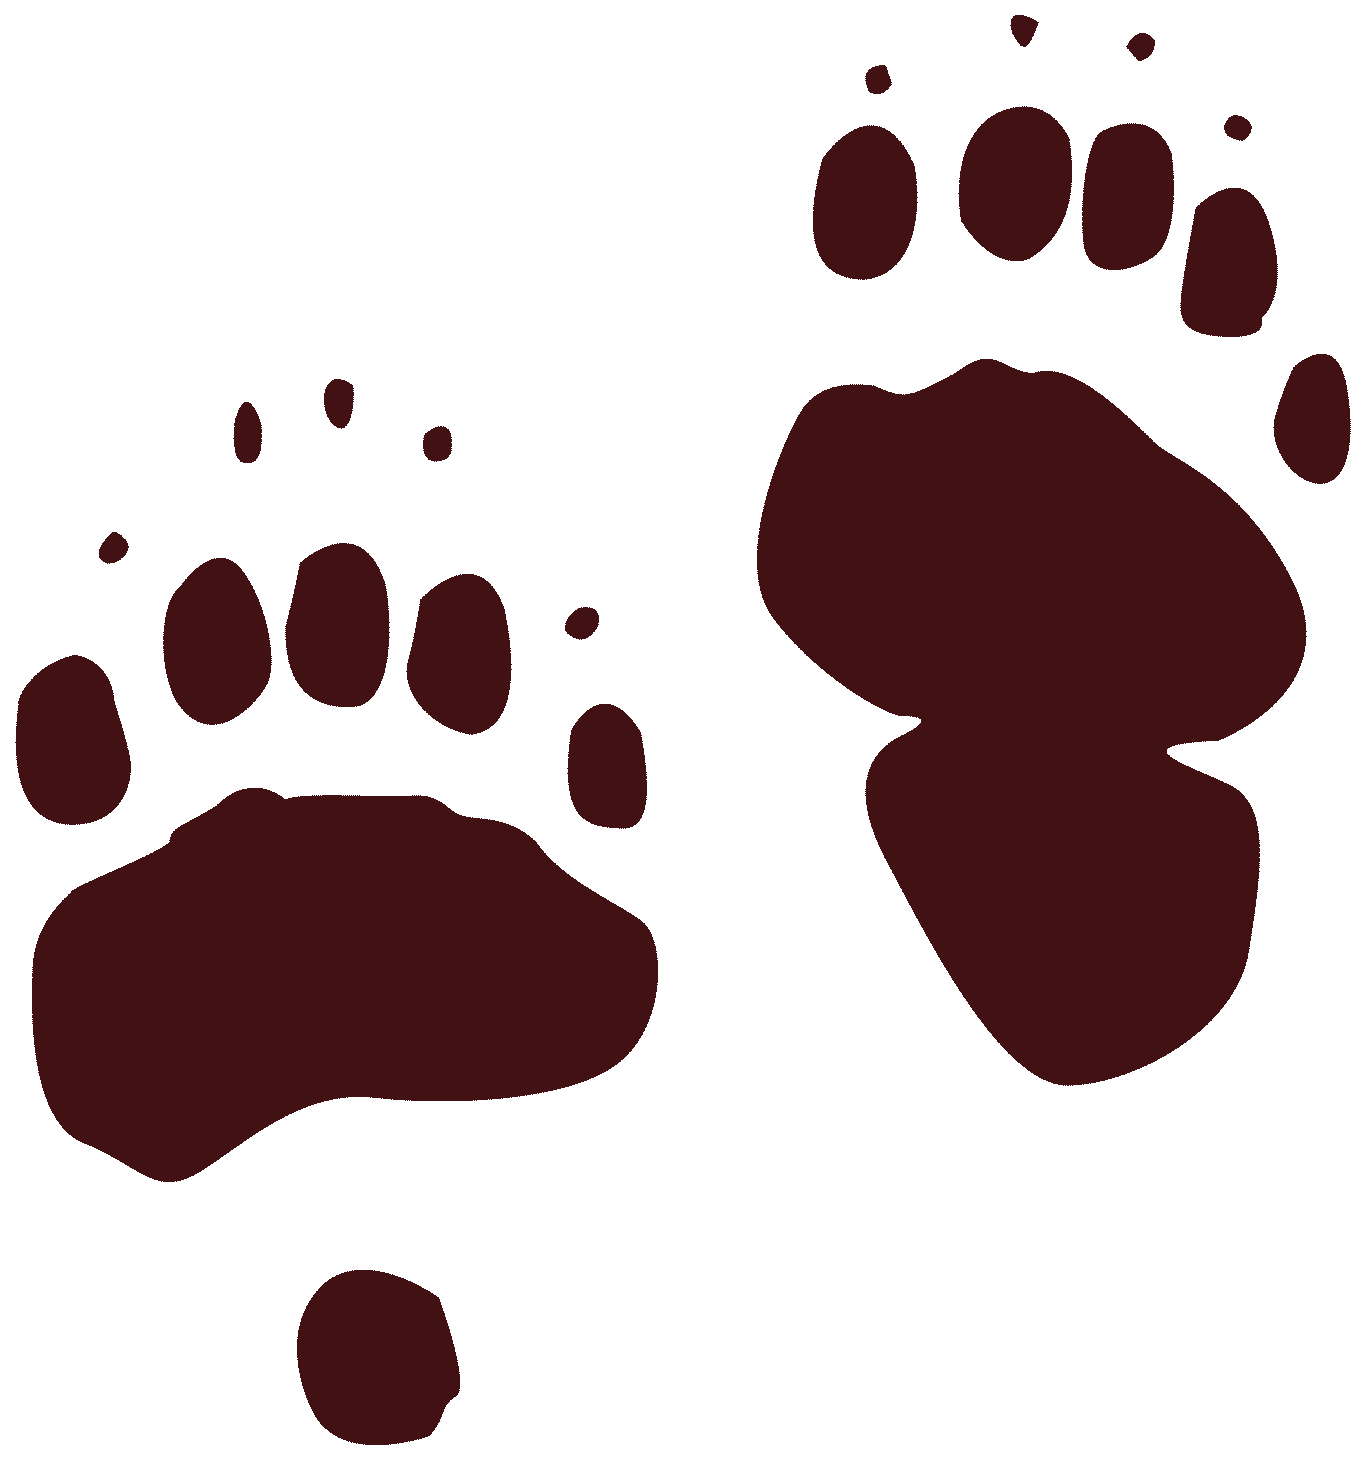 Bear tracks clip art clipart images gallery for free.